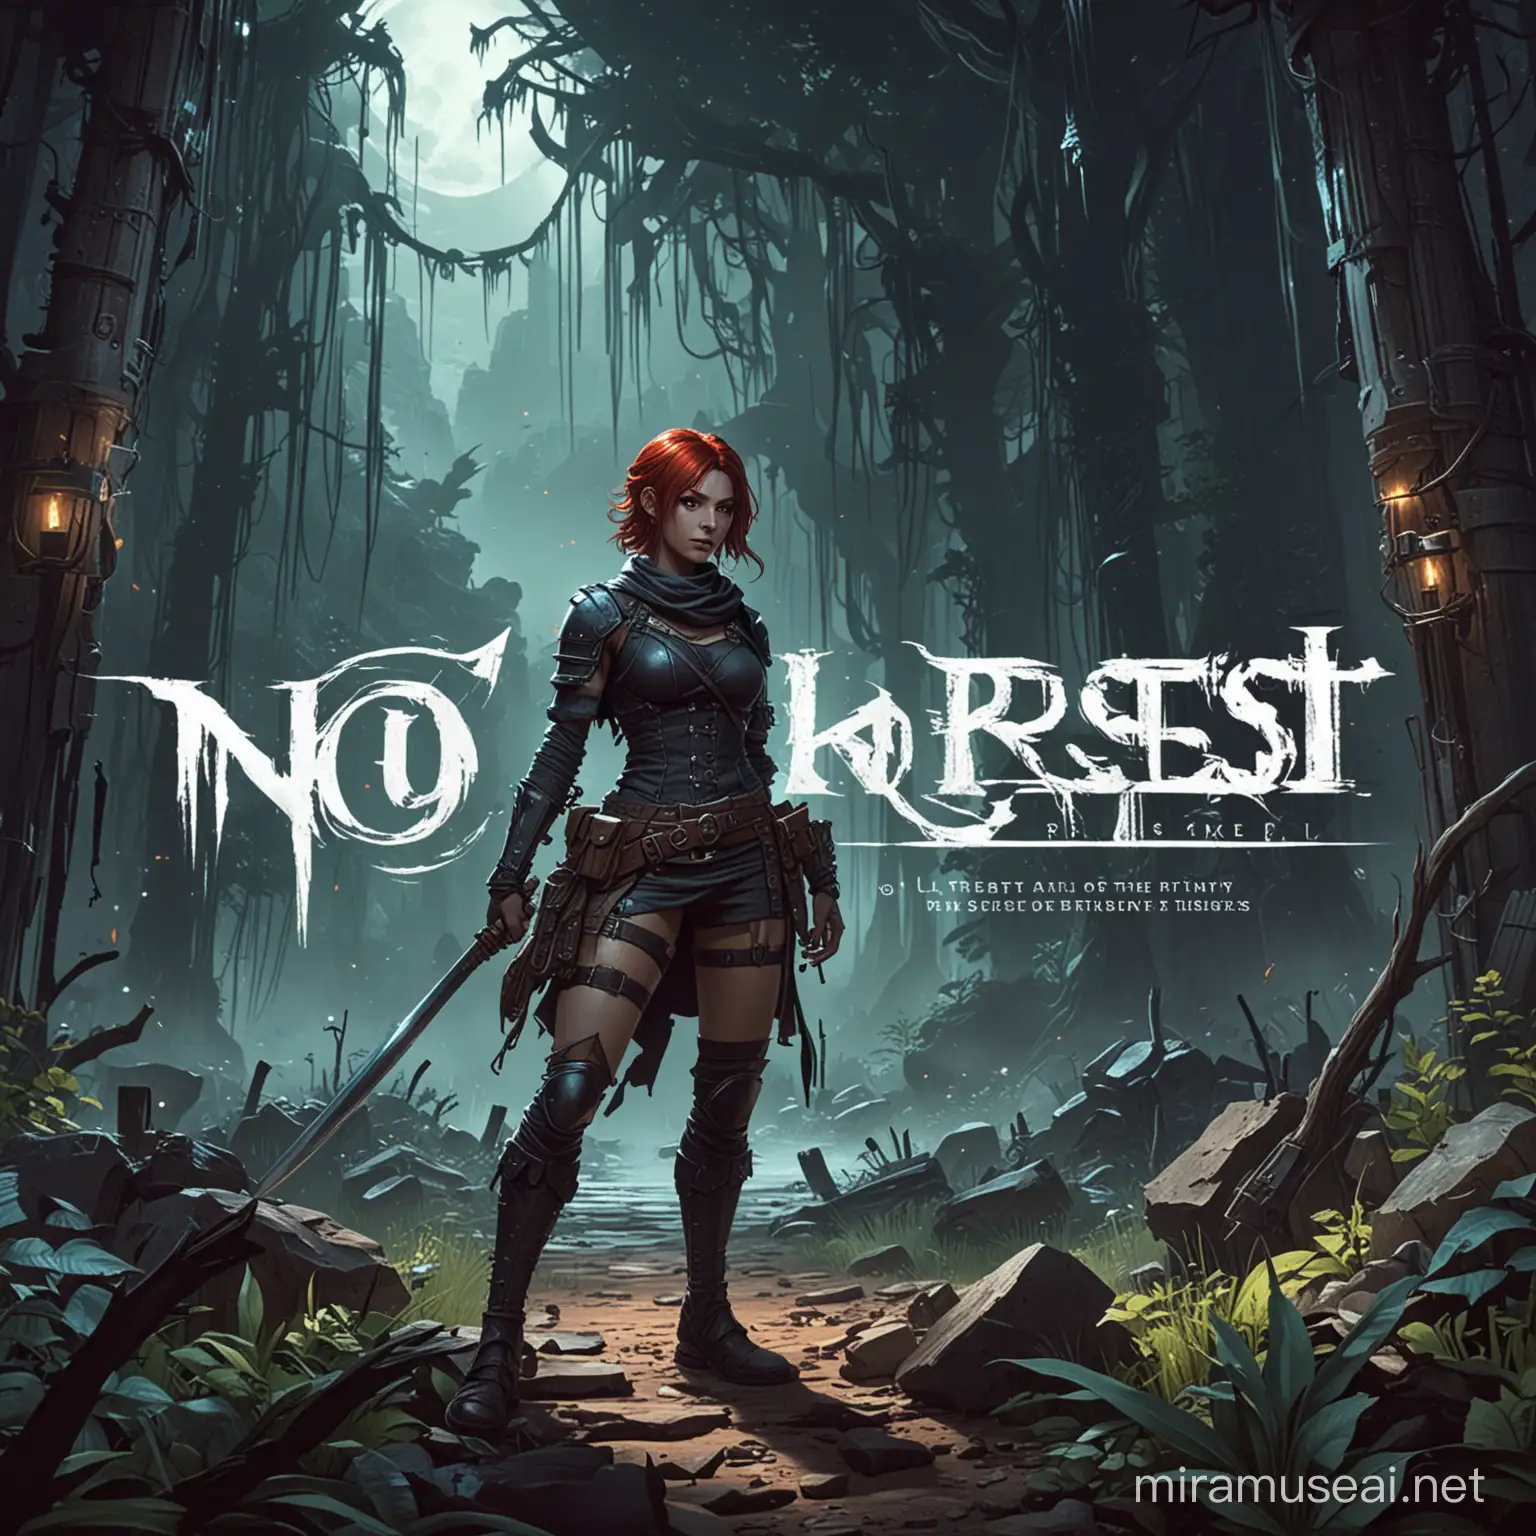 No Rest for the Wicked, a visceral, precision Action RPG set to reinvent the genre